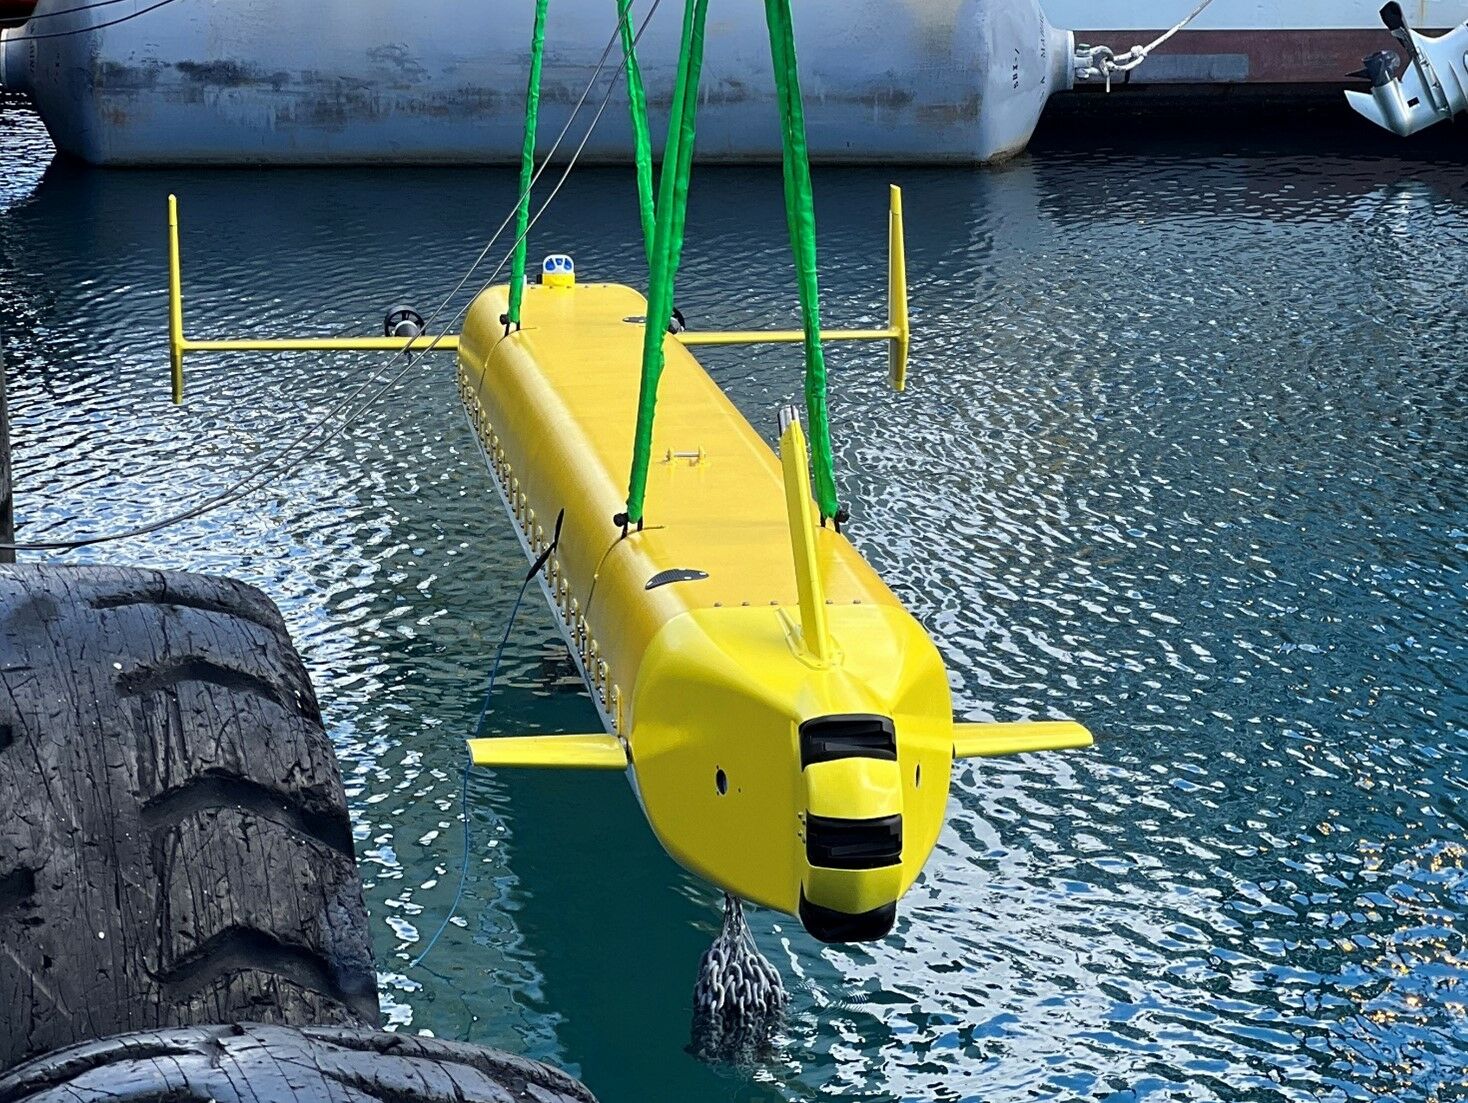 DARPA takes its long-duration Manta undersea drone for a test-dip – Source: go.theregister.com